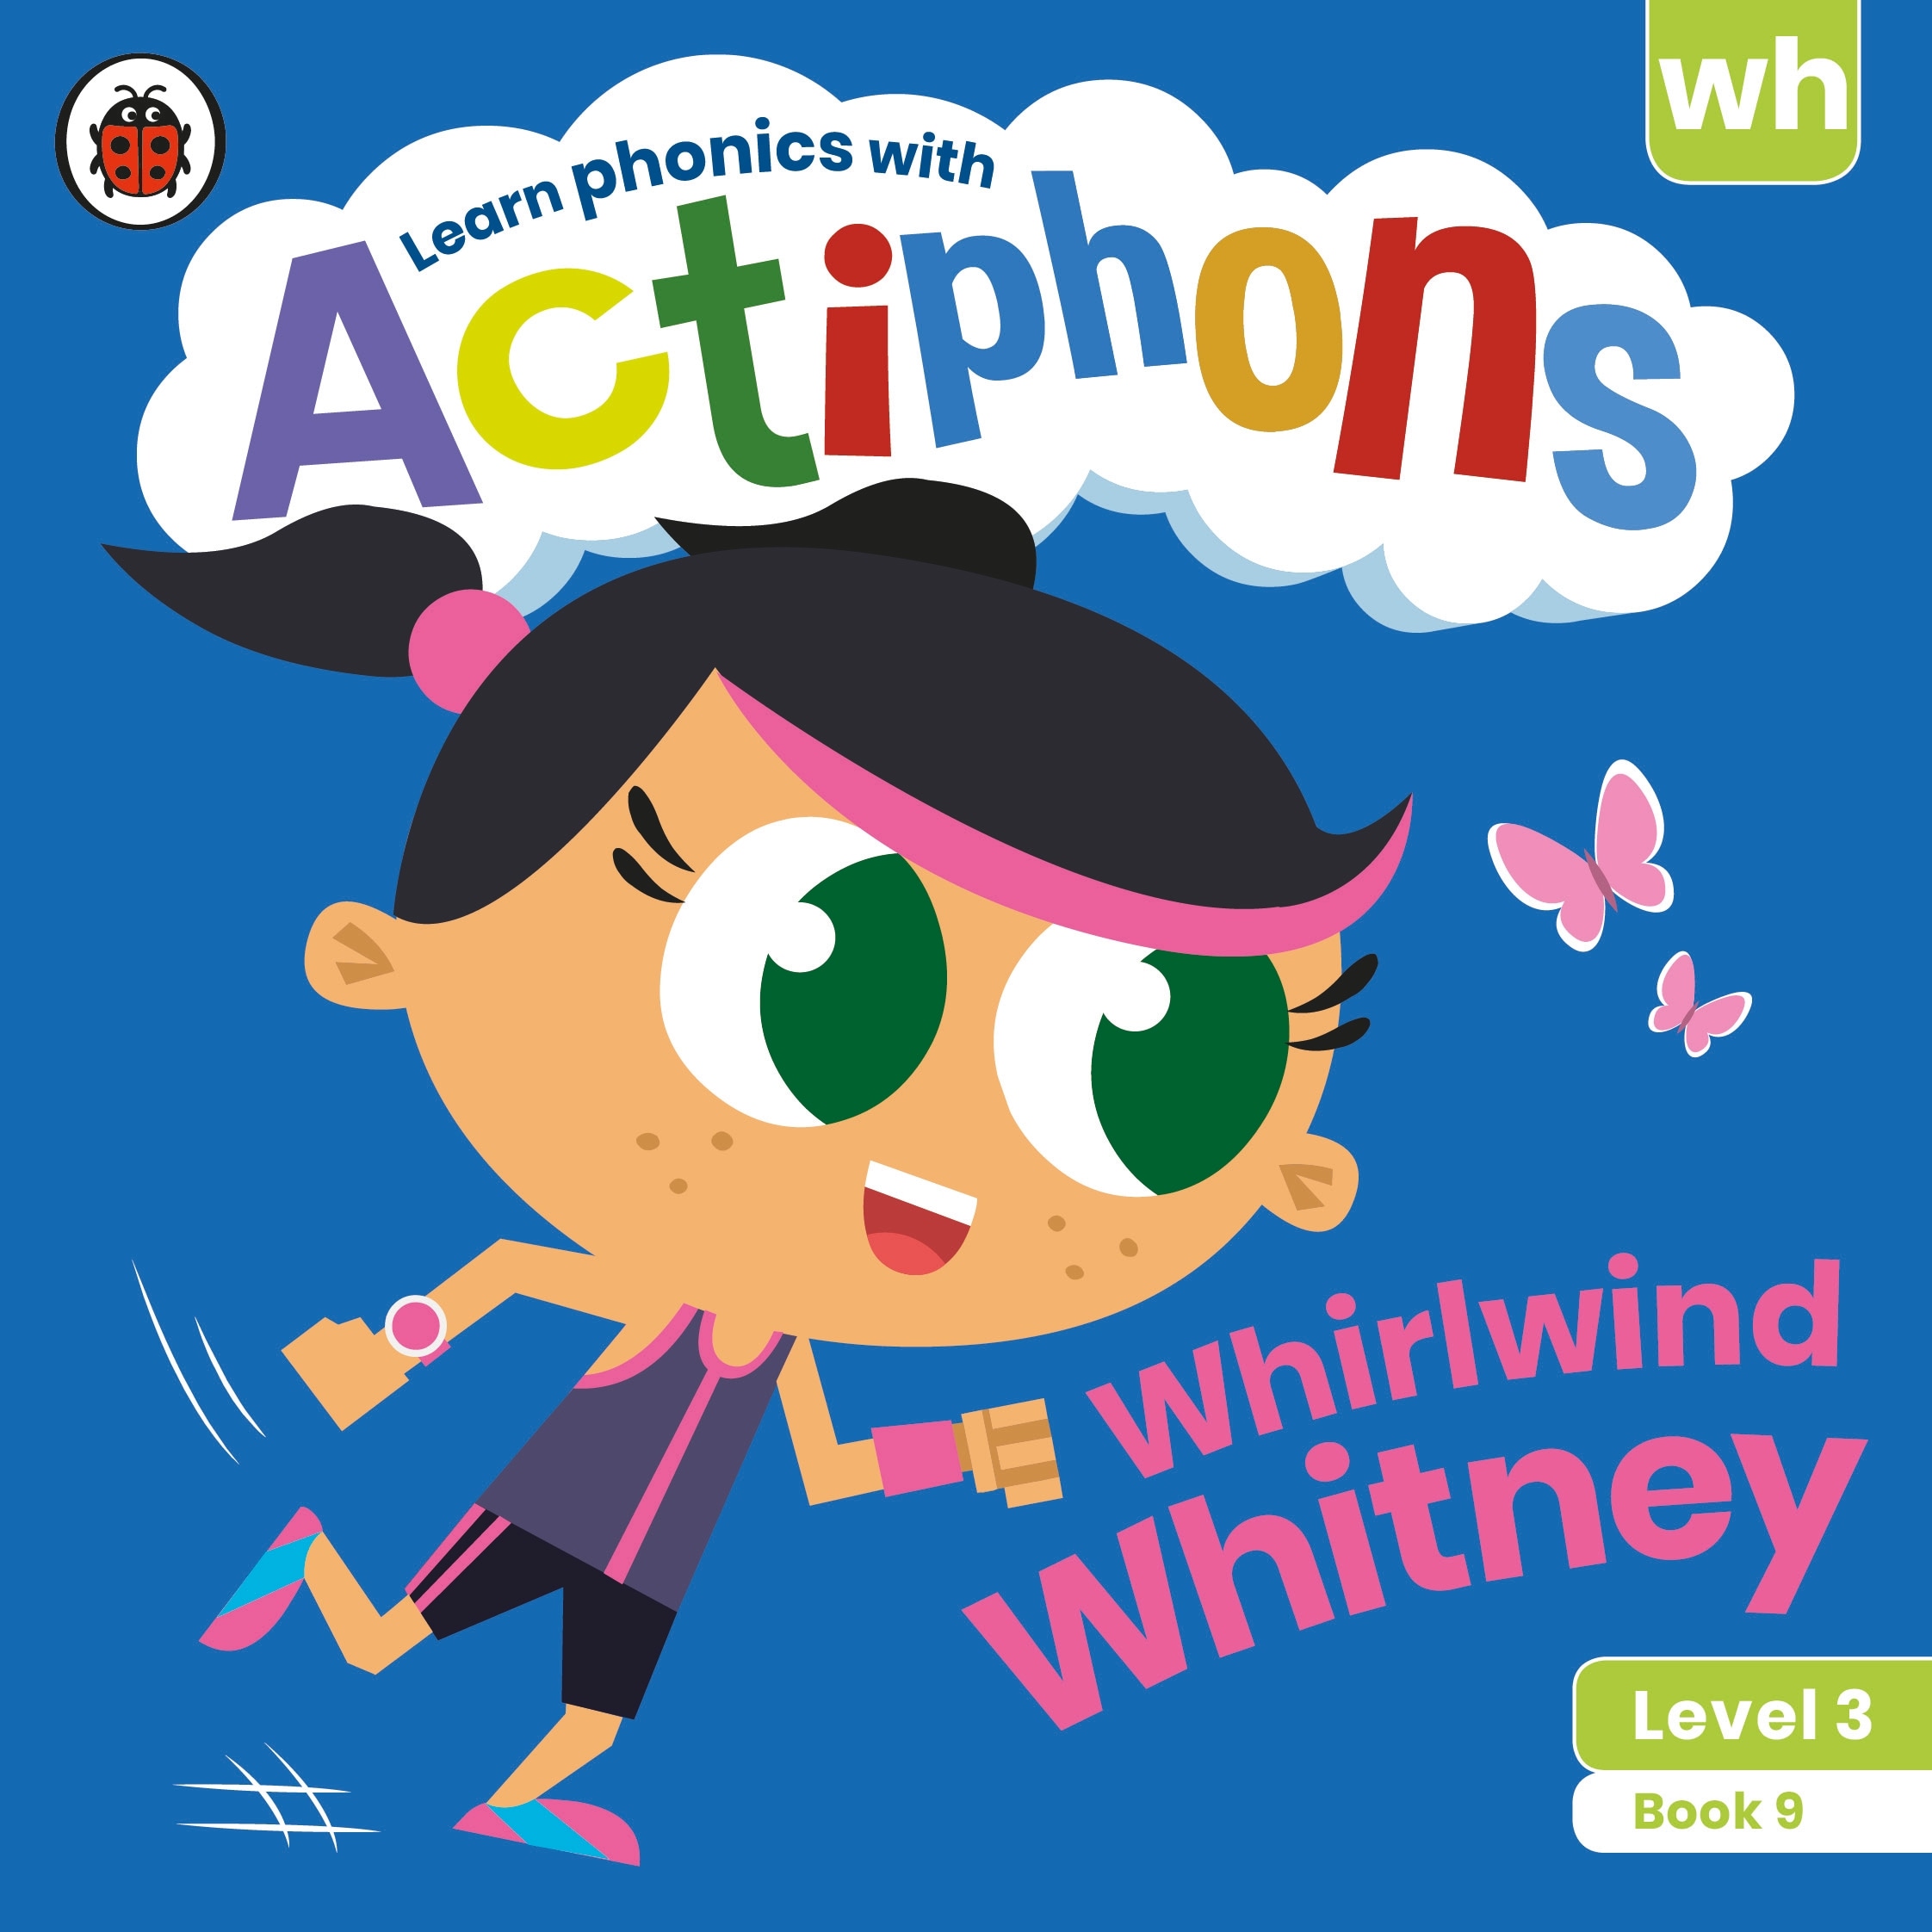 Actiphons Level 3 Book 9 Whirlwind Whitney